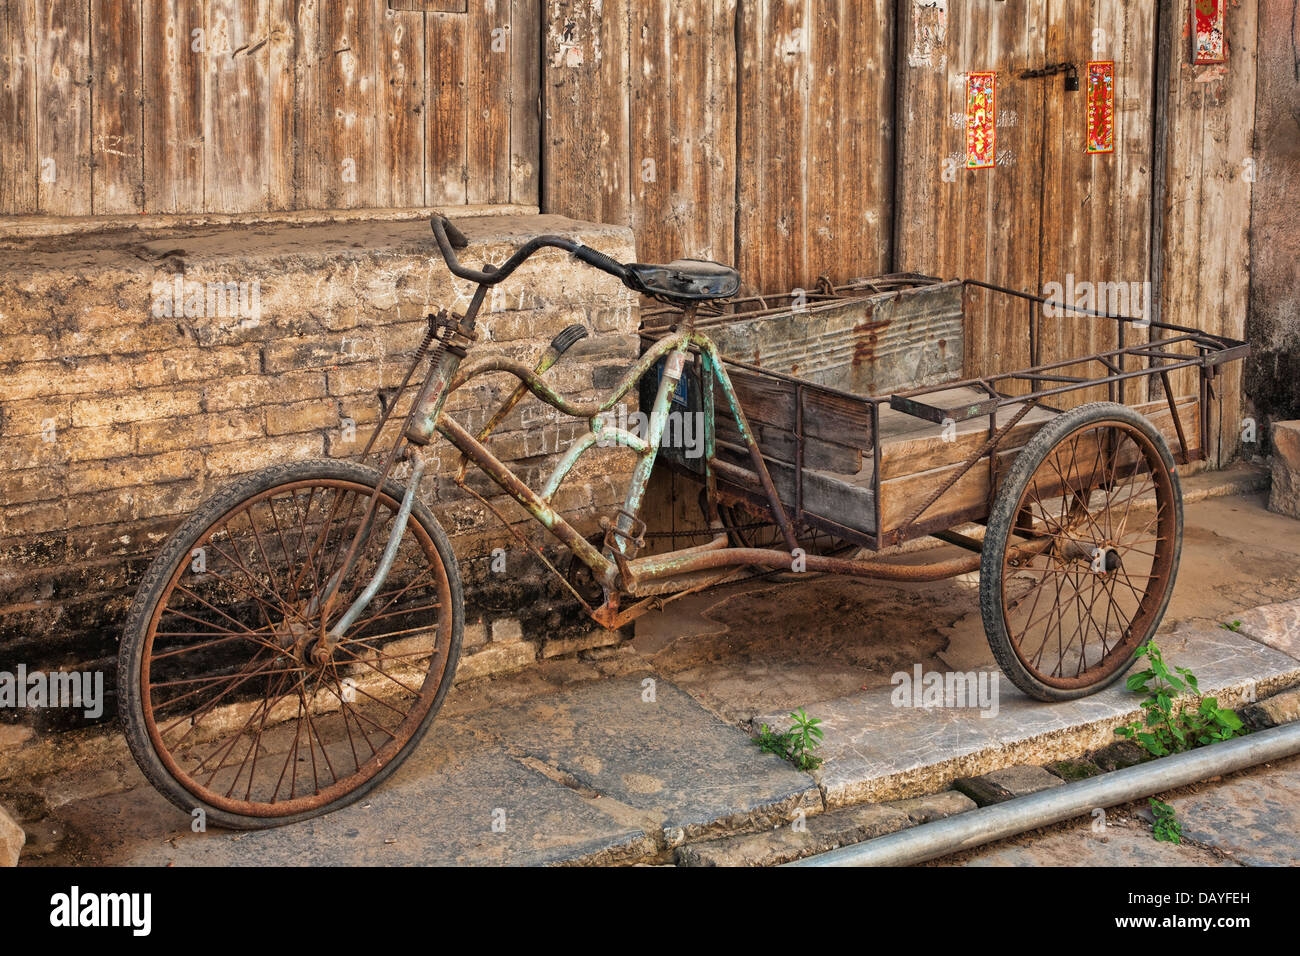 An antique bicyle in the old town of Daxu. Daxu Ancient Town was formed at the beginning of the Song dynasty. Stock Photo